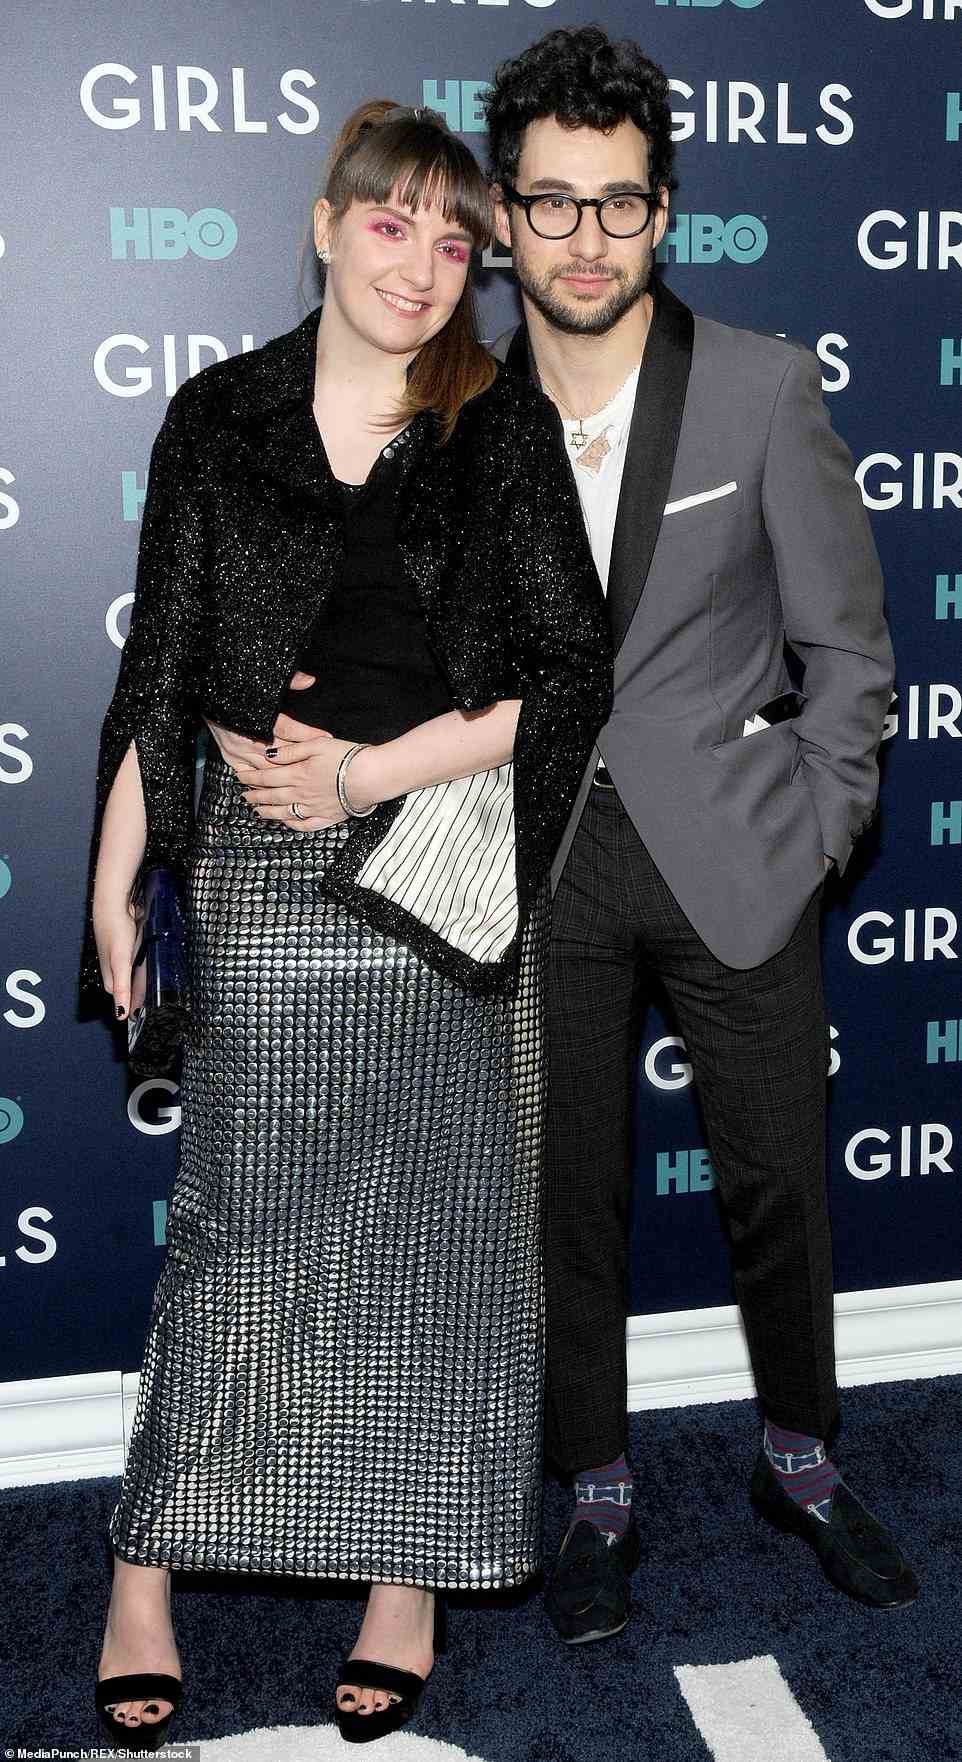 In 2012, he started dating Lena (pictured in 2017), whom he was with for six years until they split in 2018. People reported that their relationship kicked off after they were set up on a blind date back Jack's sister Rachel and comedian Mike Birbiglia